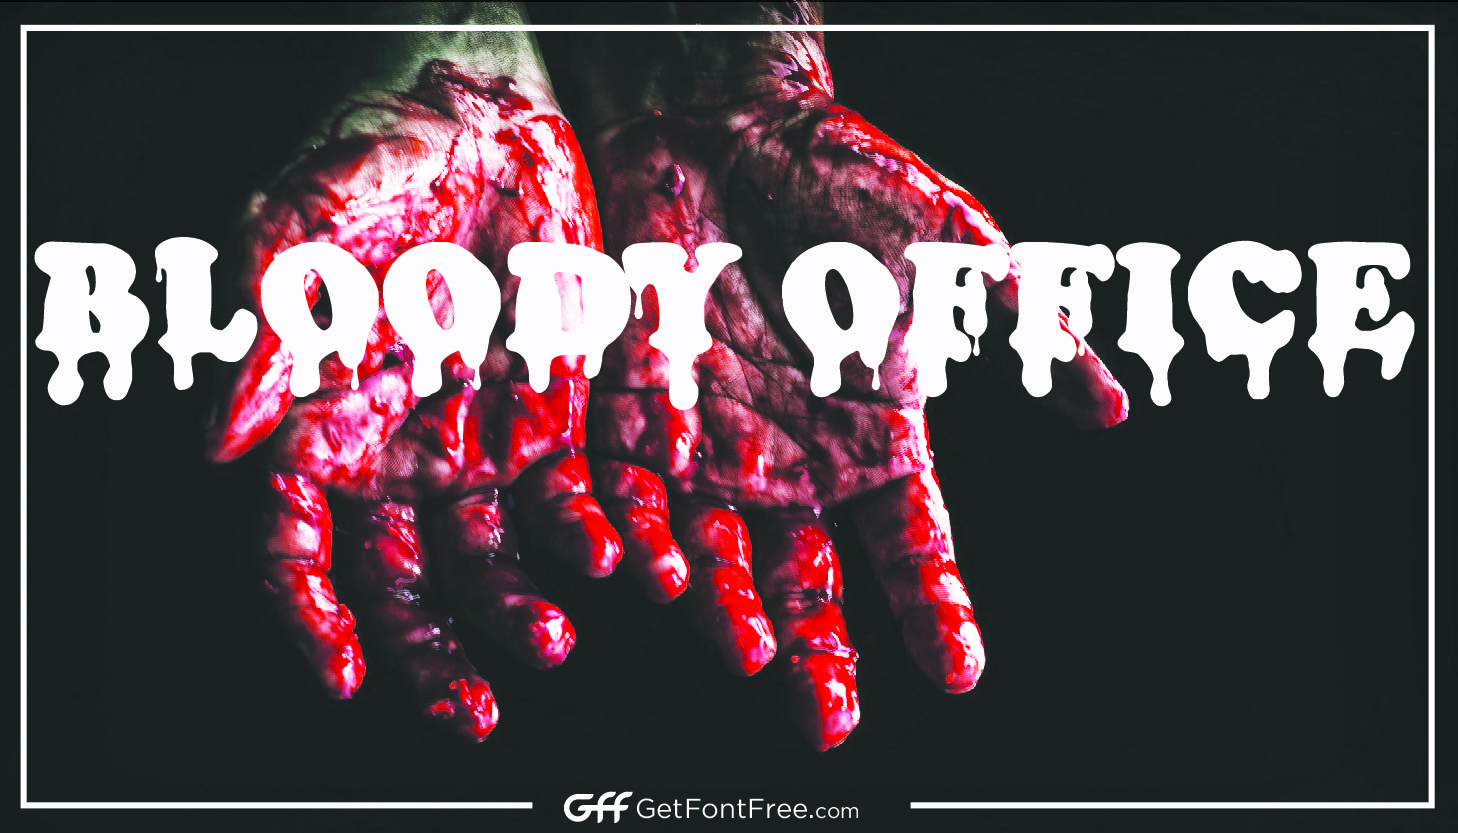 Bloody Office is likely a font with a horror or Halloween-style appearance, simulating the appearance of letters written or typed in blood. This font style may be used for horror, Halloween, or spooky-themed designs, or for adding a dramatic touch to text-based designs. The specific details of the Bloody Office font, such as the designer, foundry, style, file format, date released, license, and type, may vary.